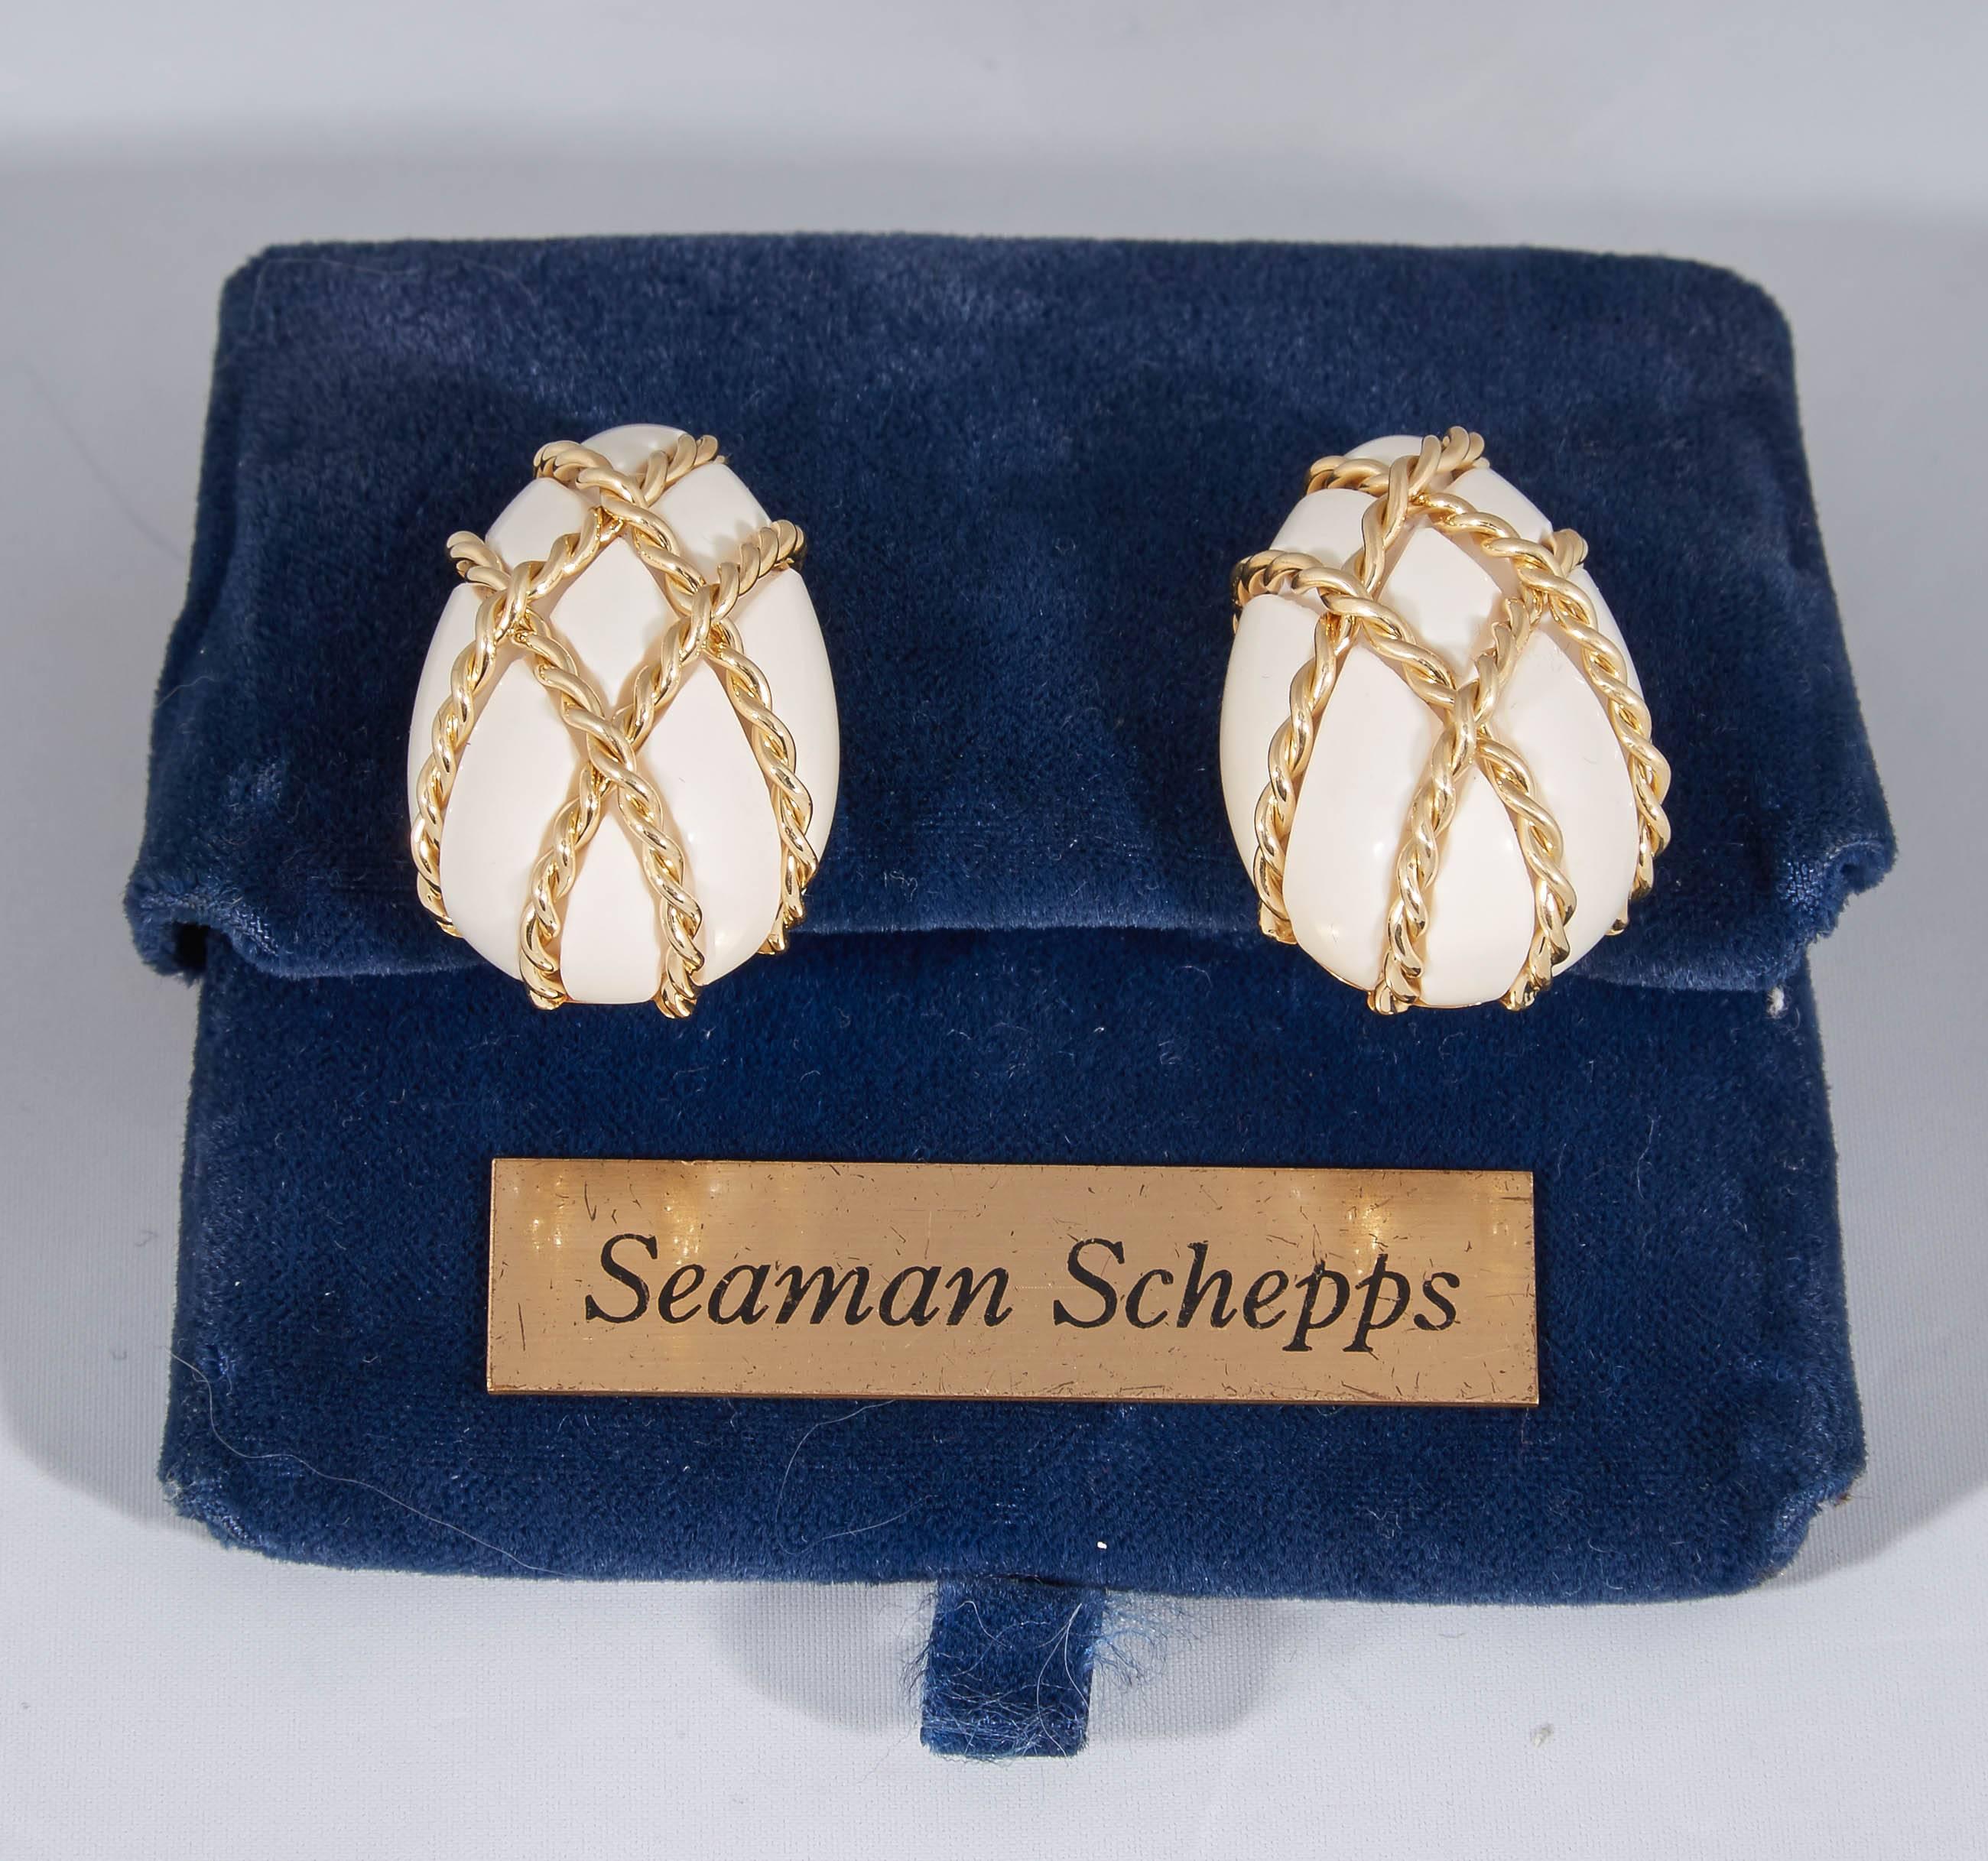 18kt Yellow Gold White Coral In The Cage Earclips Designed With Two Large White Coral Stones Measuring 27mm each stone. Created With A Beautiful Rope Design Effect / Cage Workmanship Upholding Each Coral Stone. Signed Seaman Schepps Serial # 1134